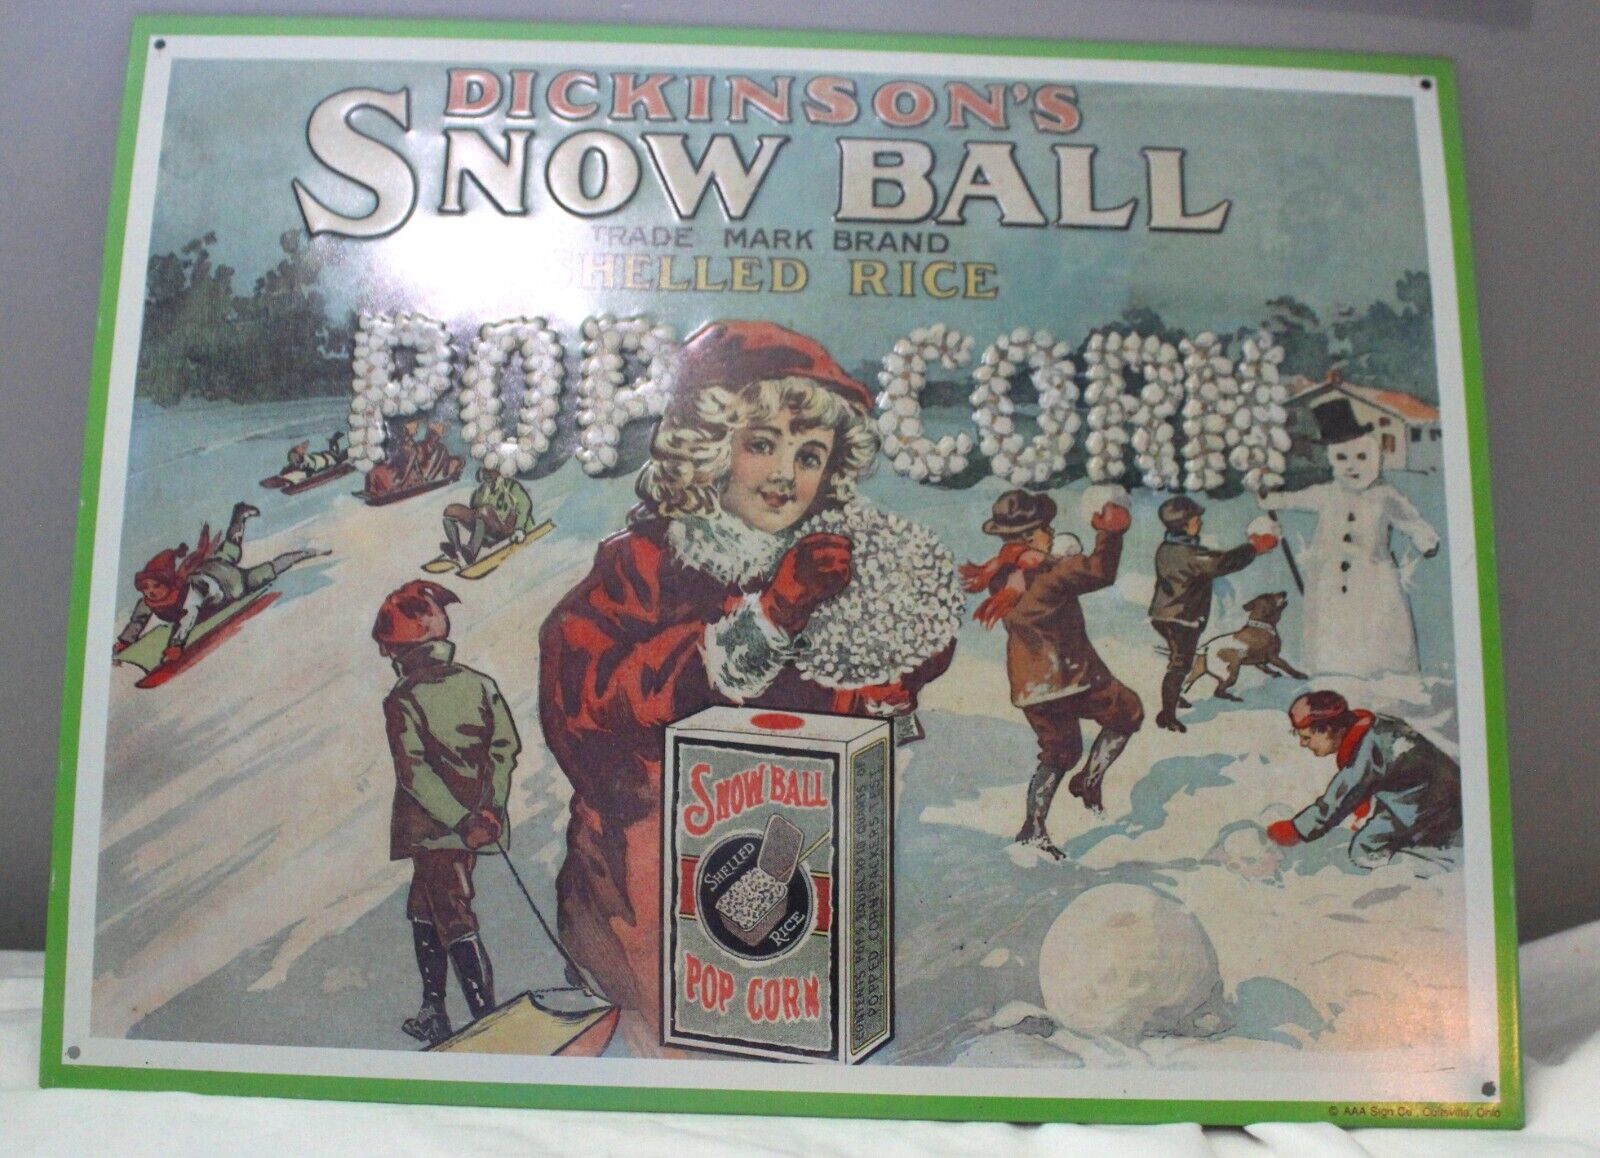 VINTAGE 1991 AAA SIGN CO DICKINSON'S SNOW BALL POPCORN SHELLED RICE TIN AD SIGN